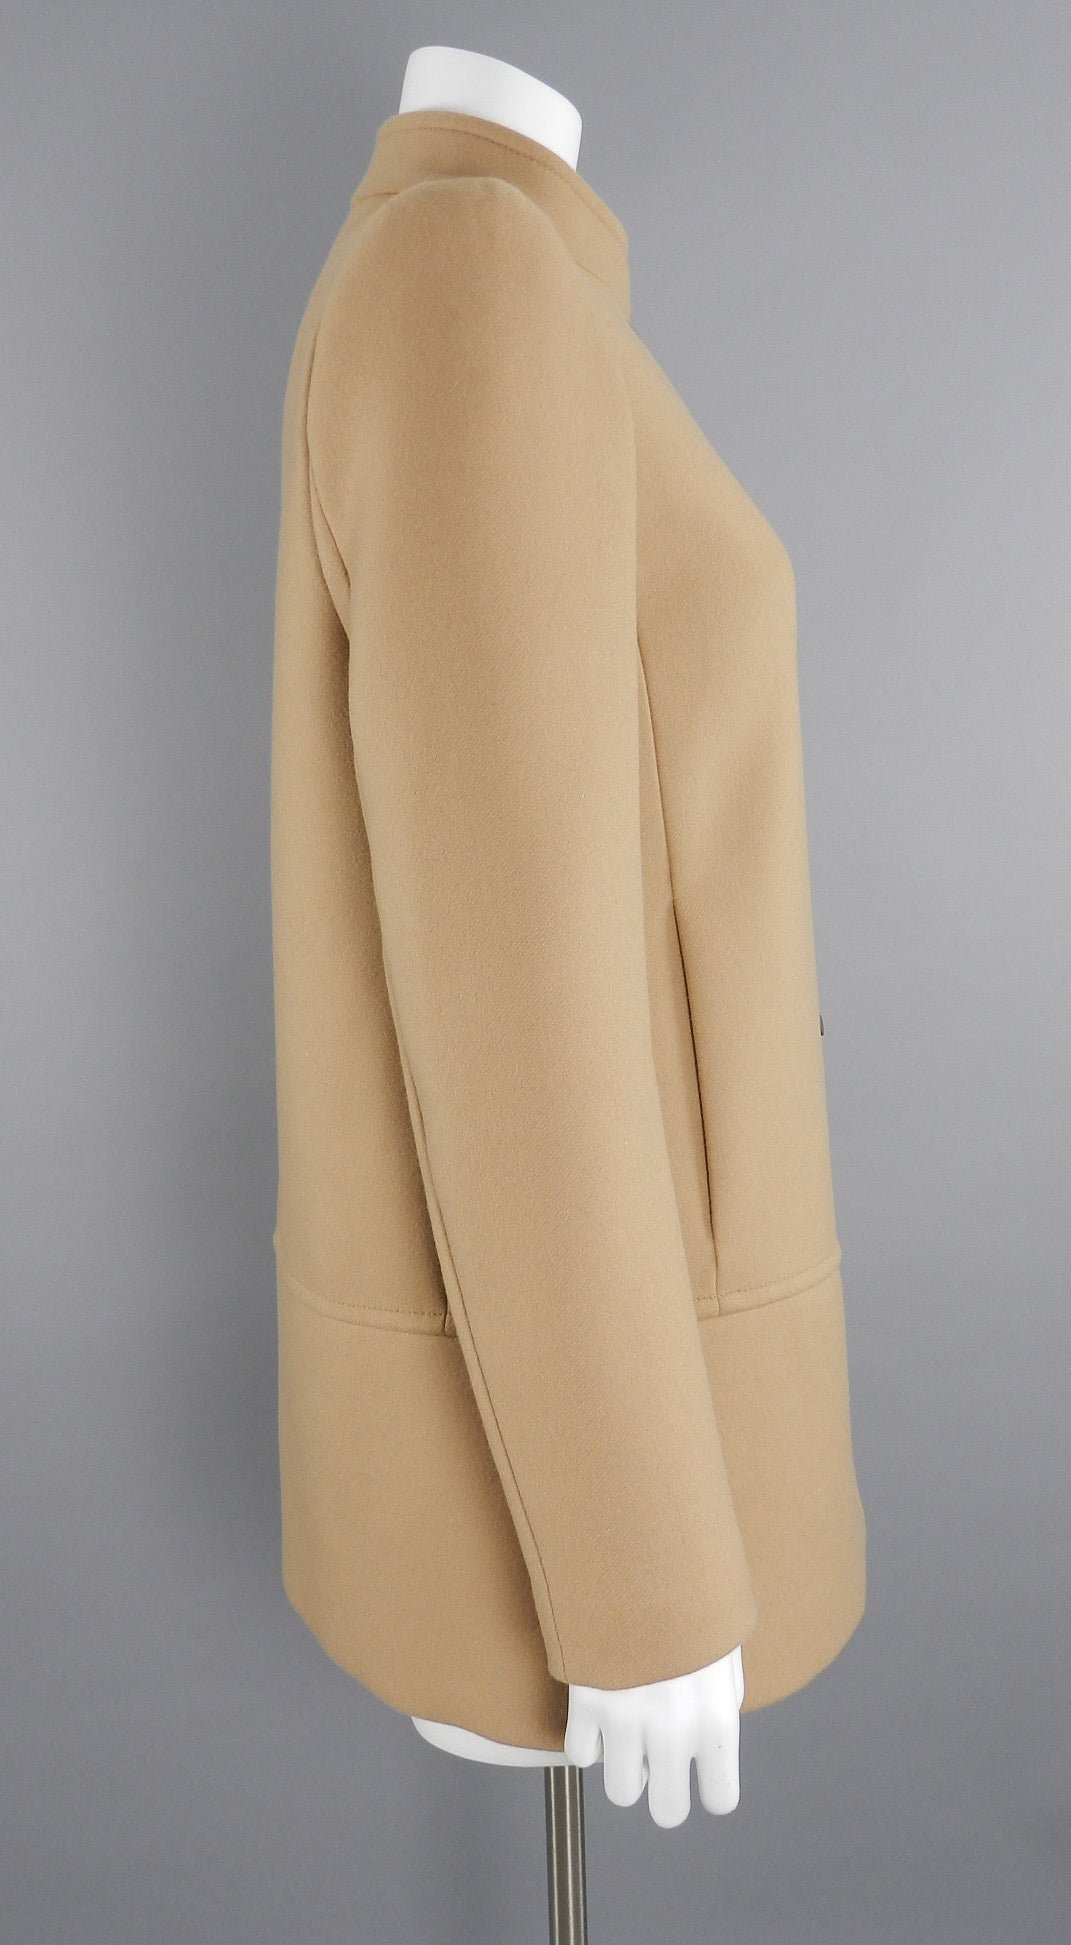 Proenza Schoulder camel wool coat with black snaps. Excellent condition - worn once. Original retail price tag of $2130 is included. Tagged size USA 4. Can fit a USA 4/6. To fit 34/35